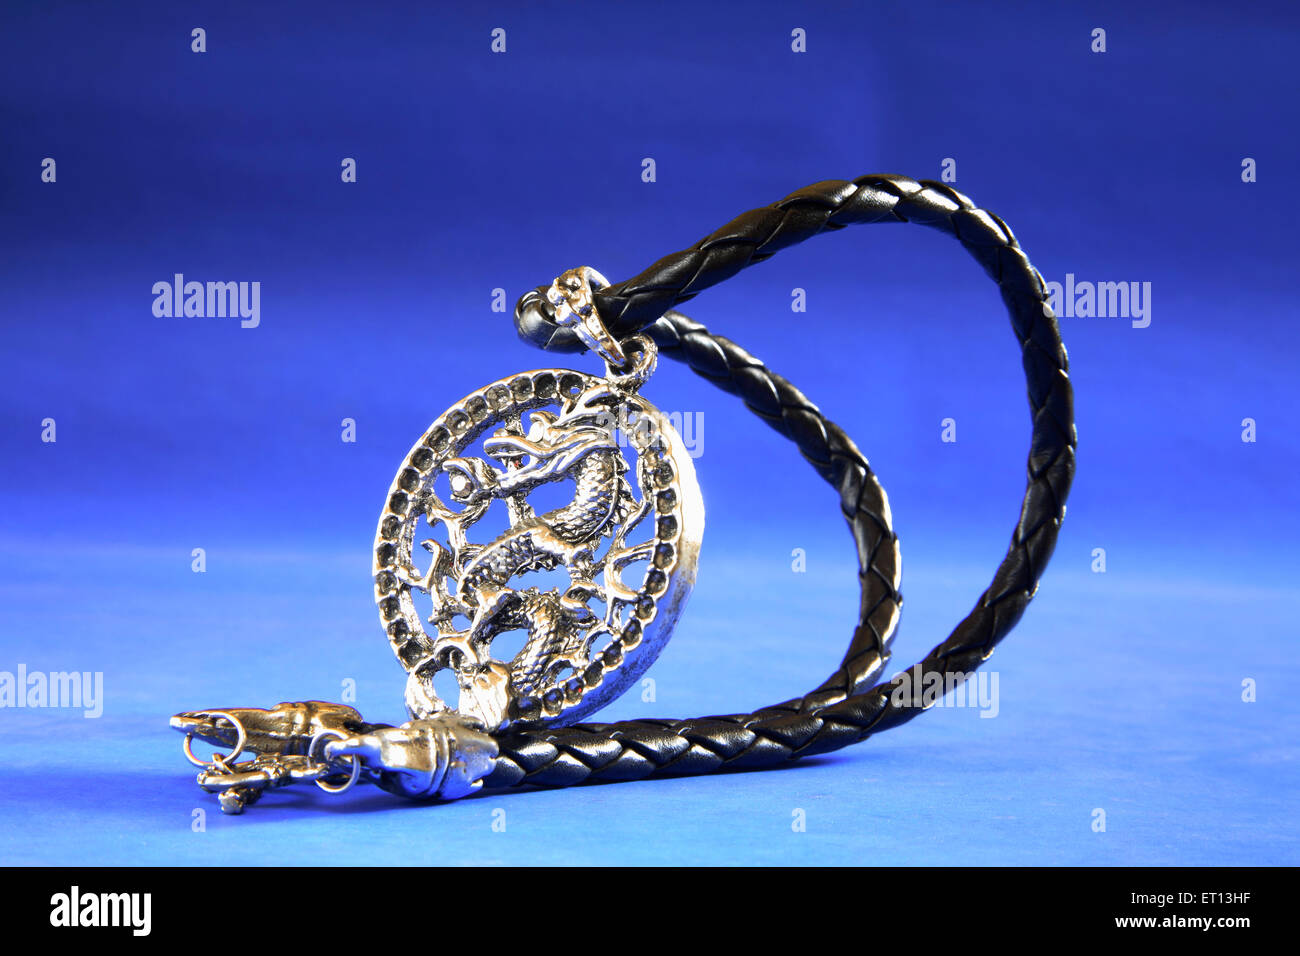 Pendant necklace amulet with Chinese Dragon design on blue background Stock Photo